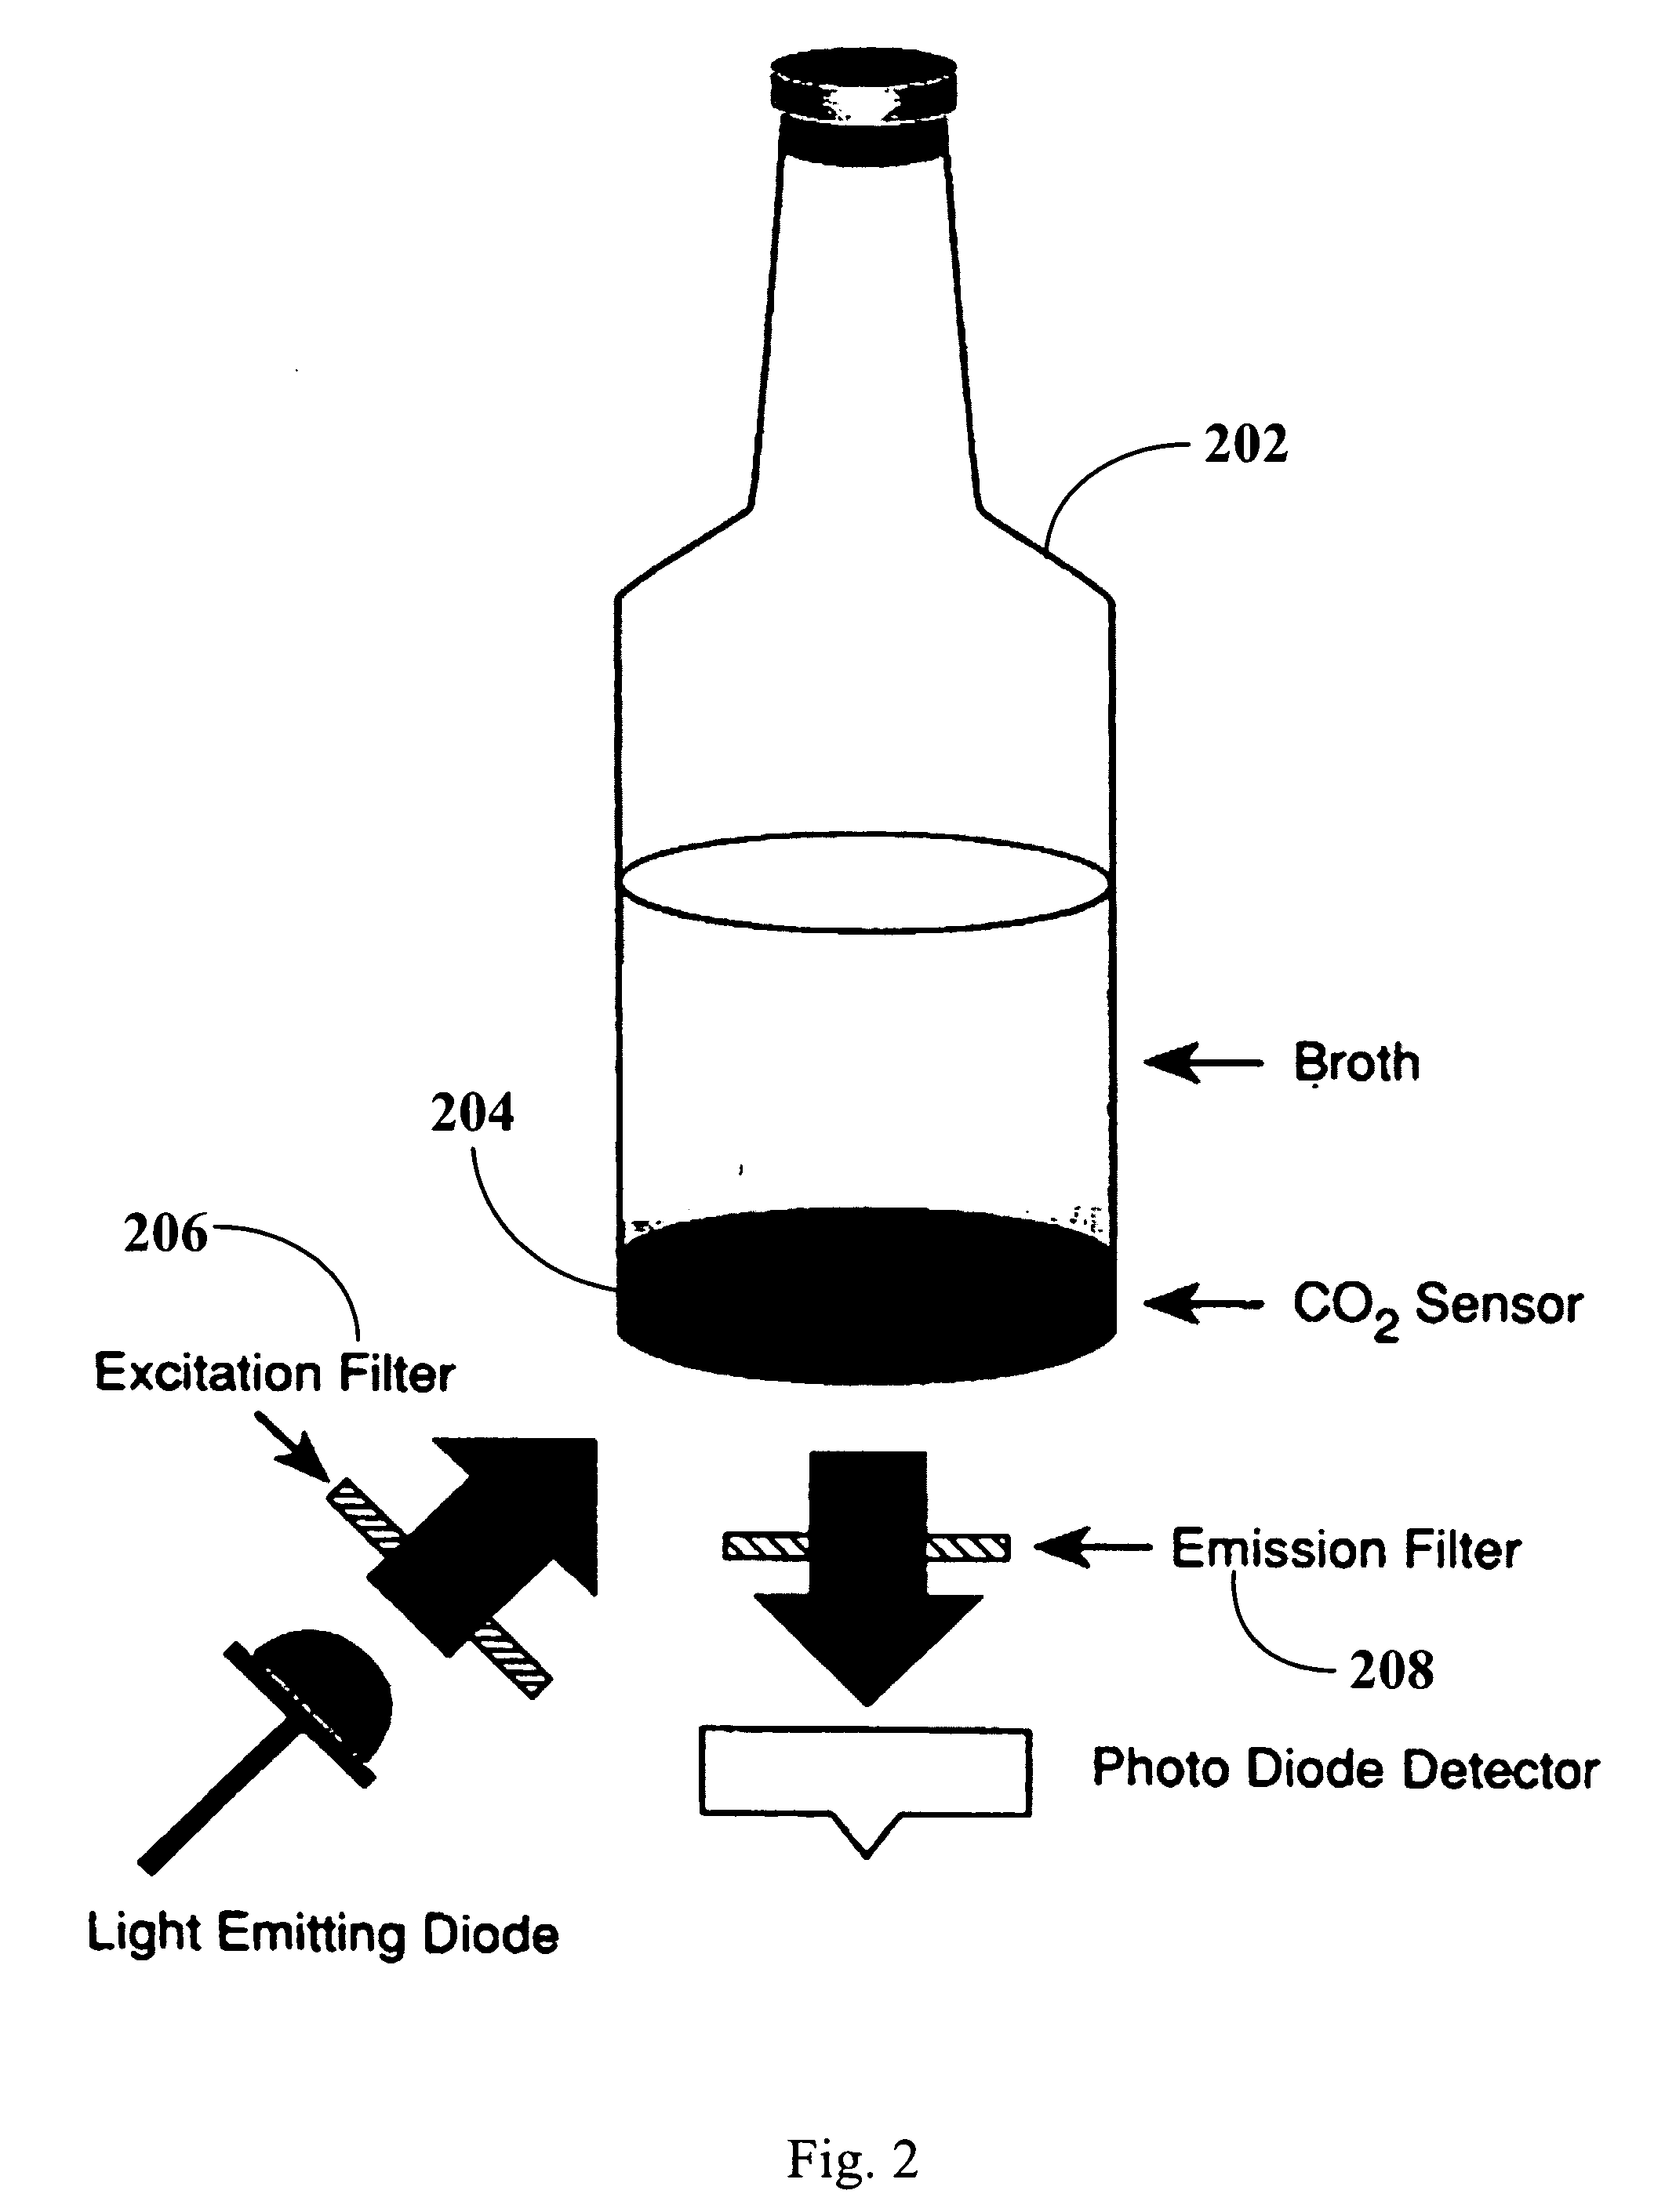 Determination of blood volume in a culture bottle